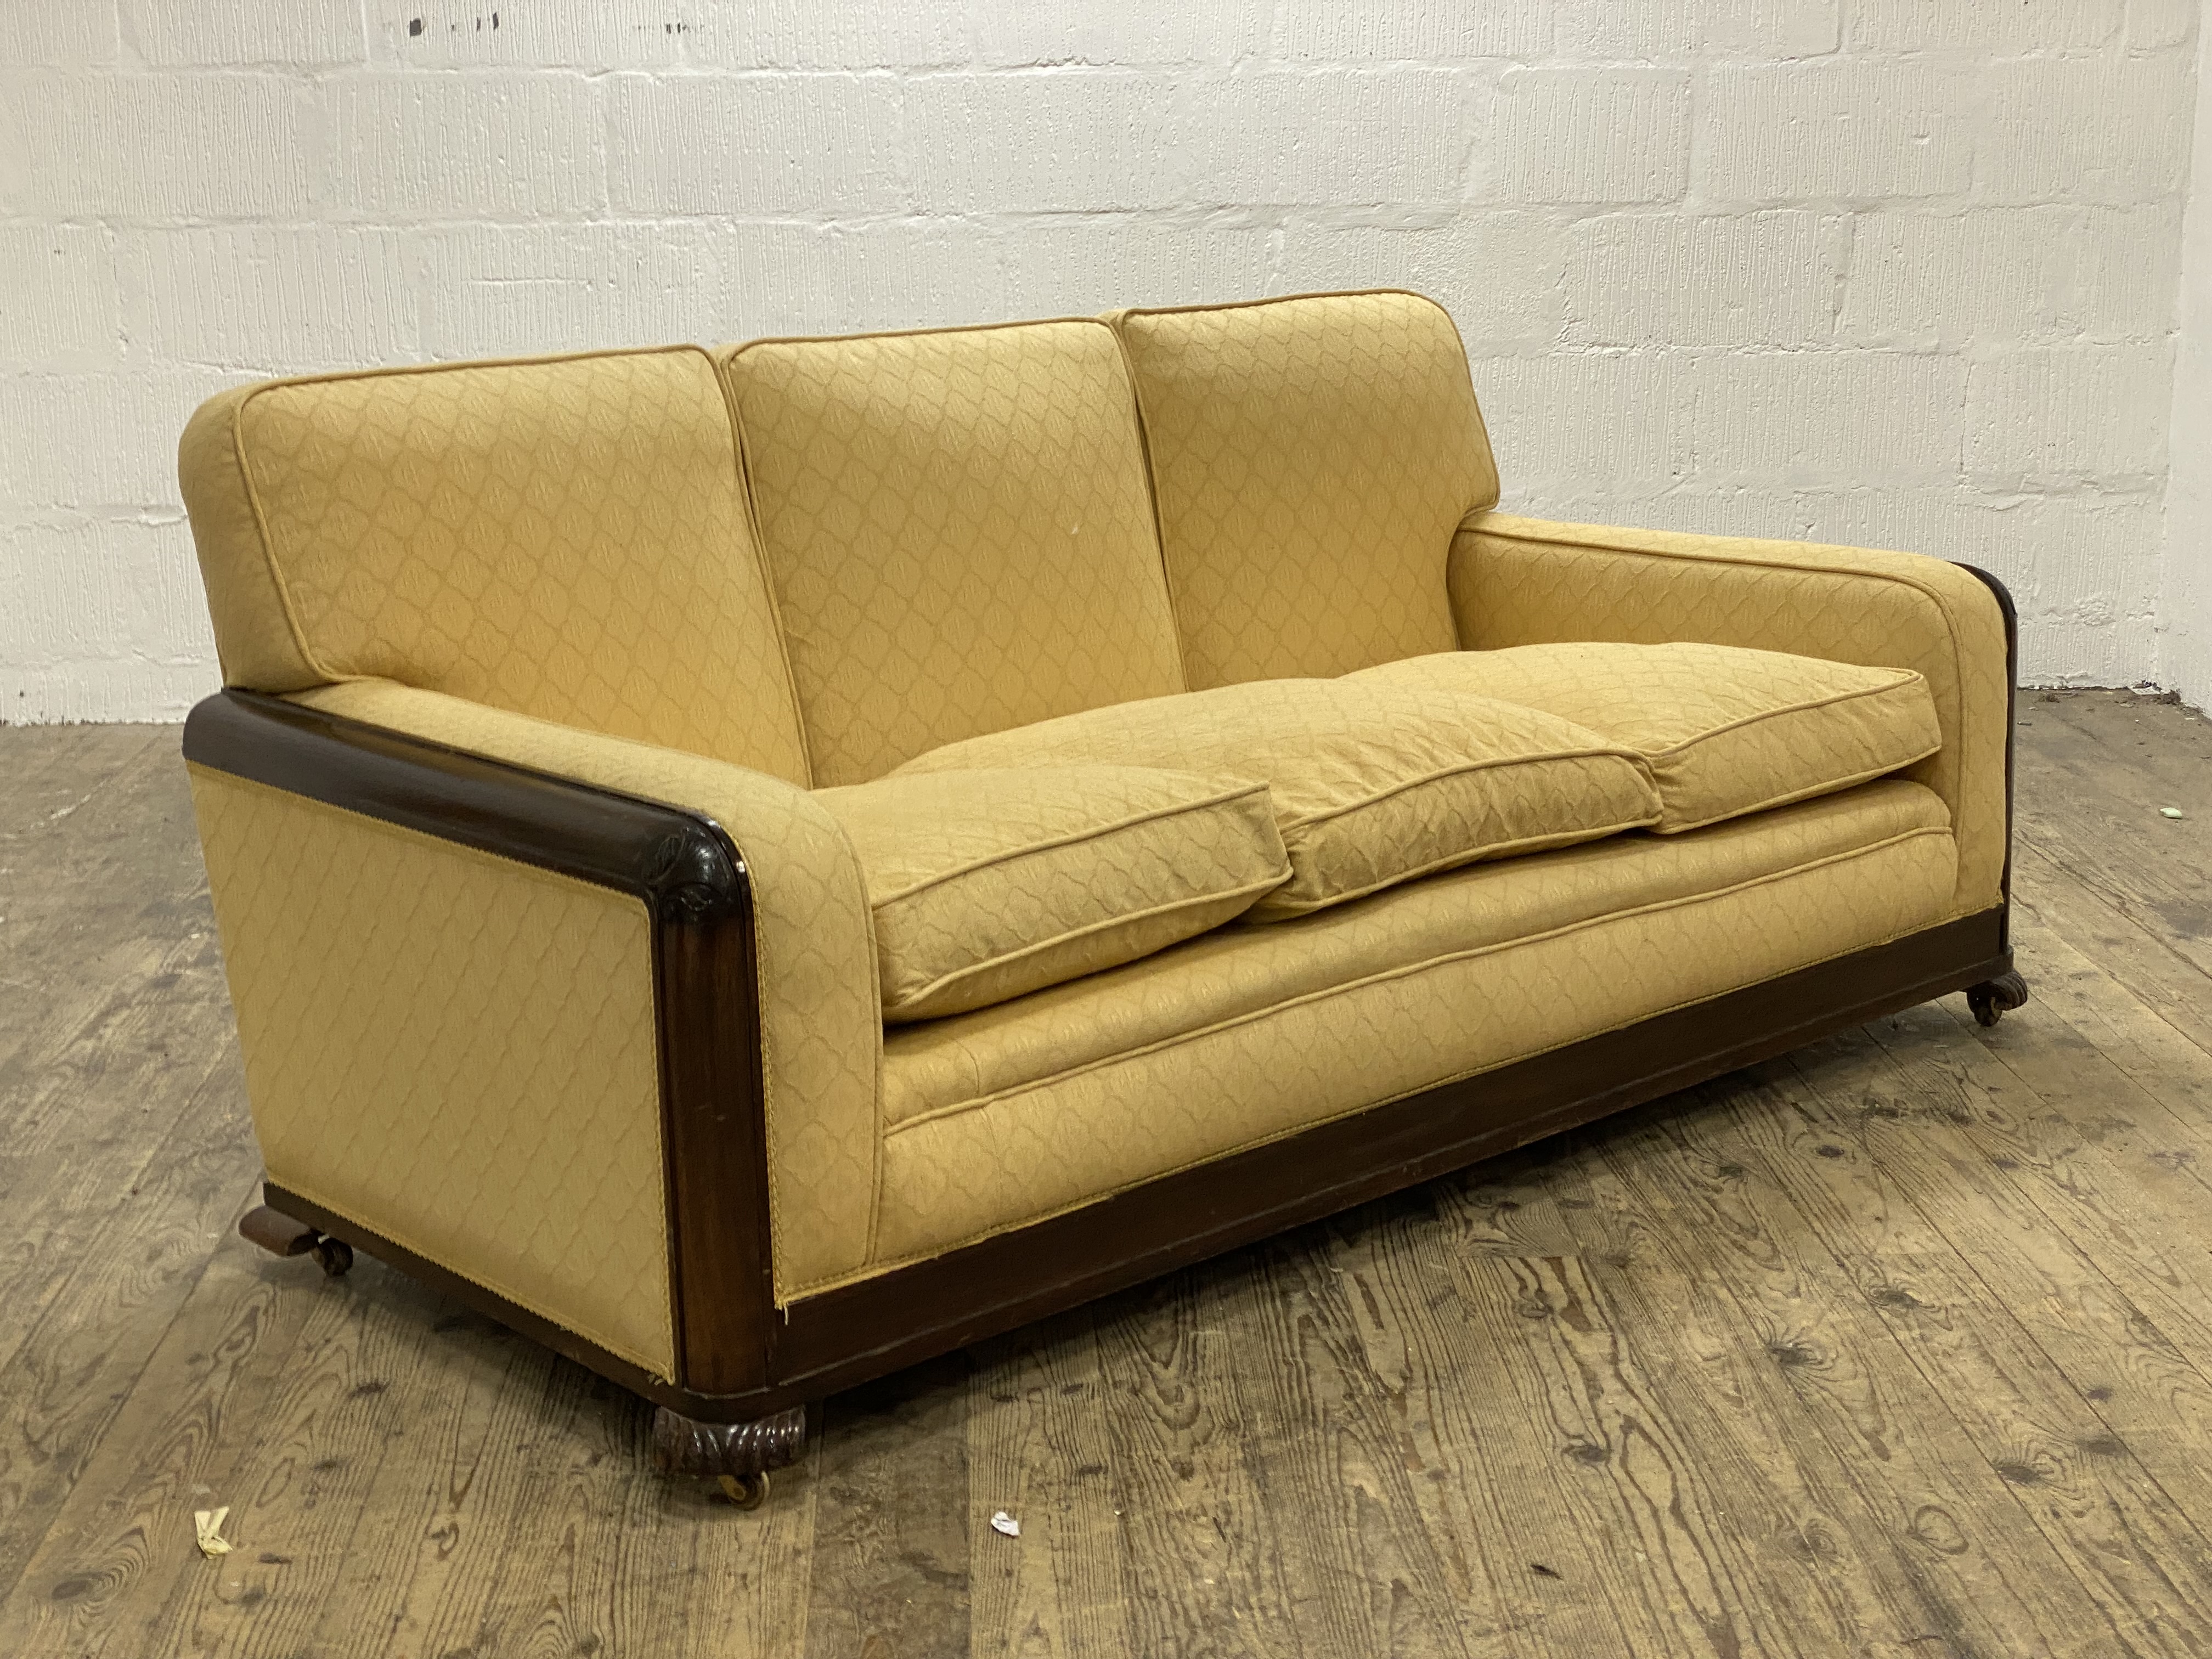 A mahogany framed three seat sofa, circa 1920's, the frame and squab cushions upholstered in